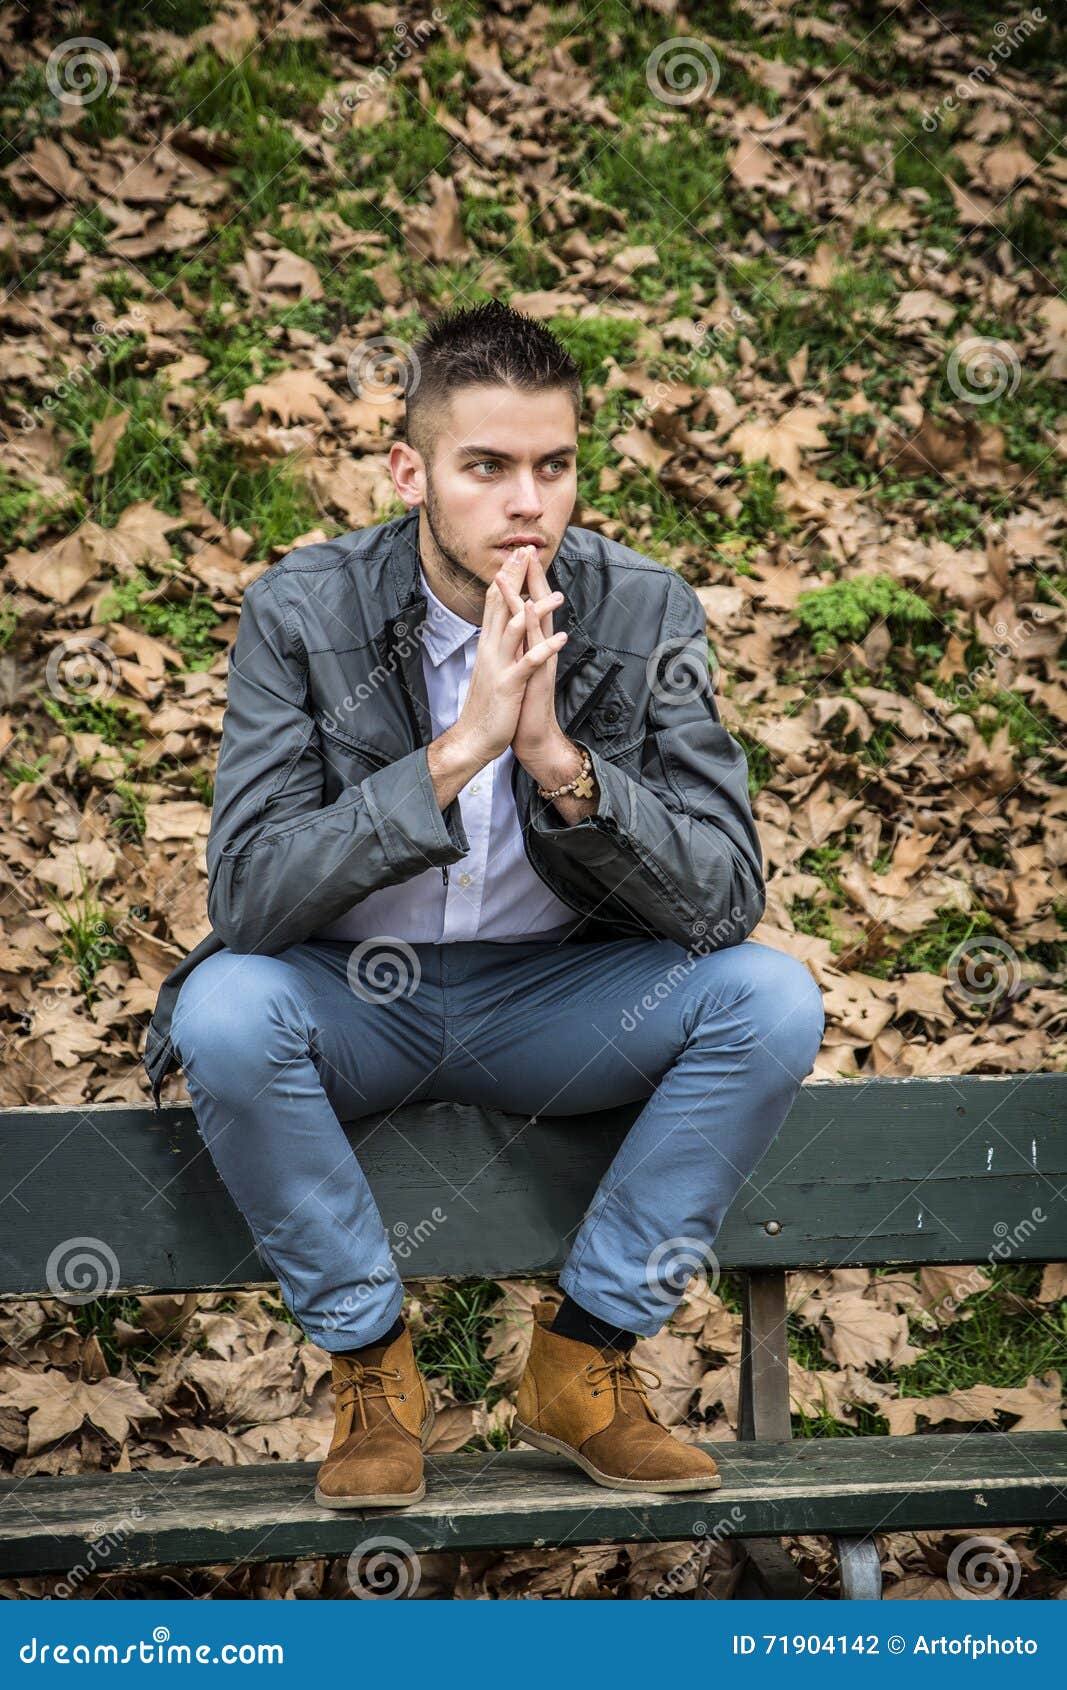 Portrait Of Man Sitting In Park Stock Photo - Image: 71904142